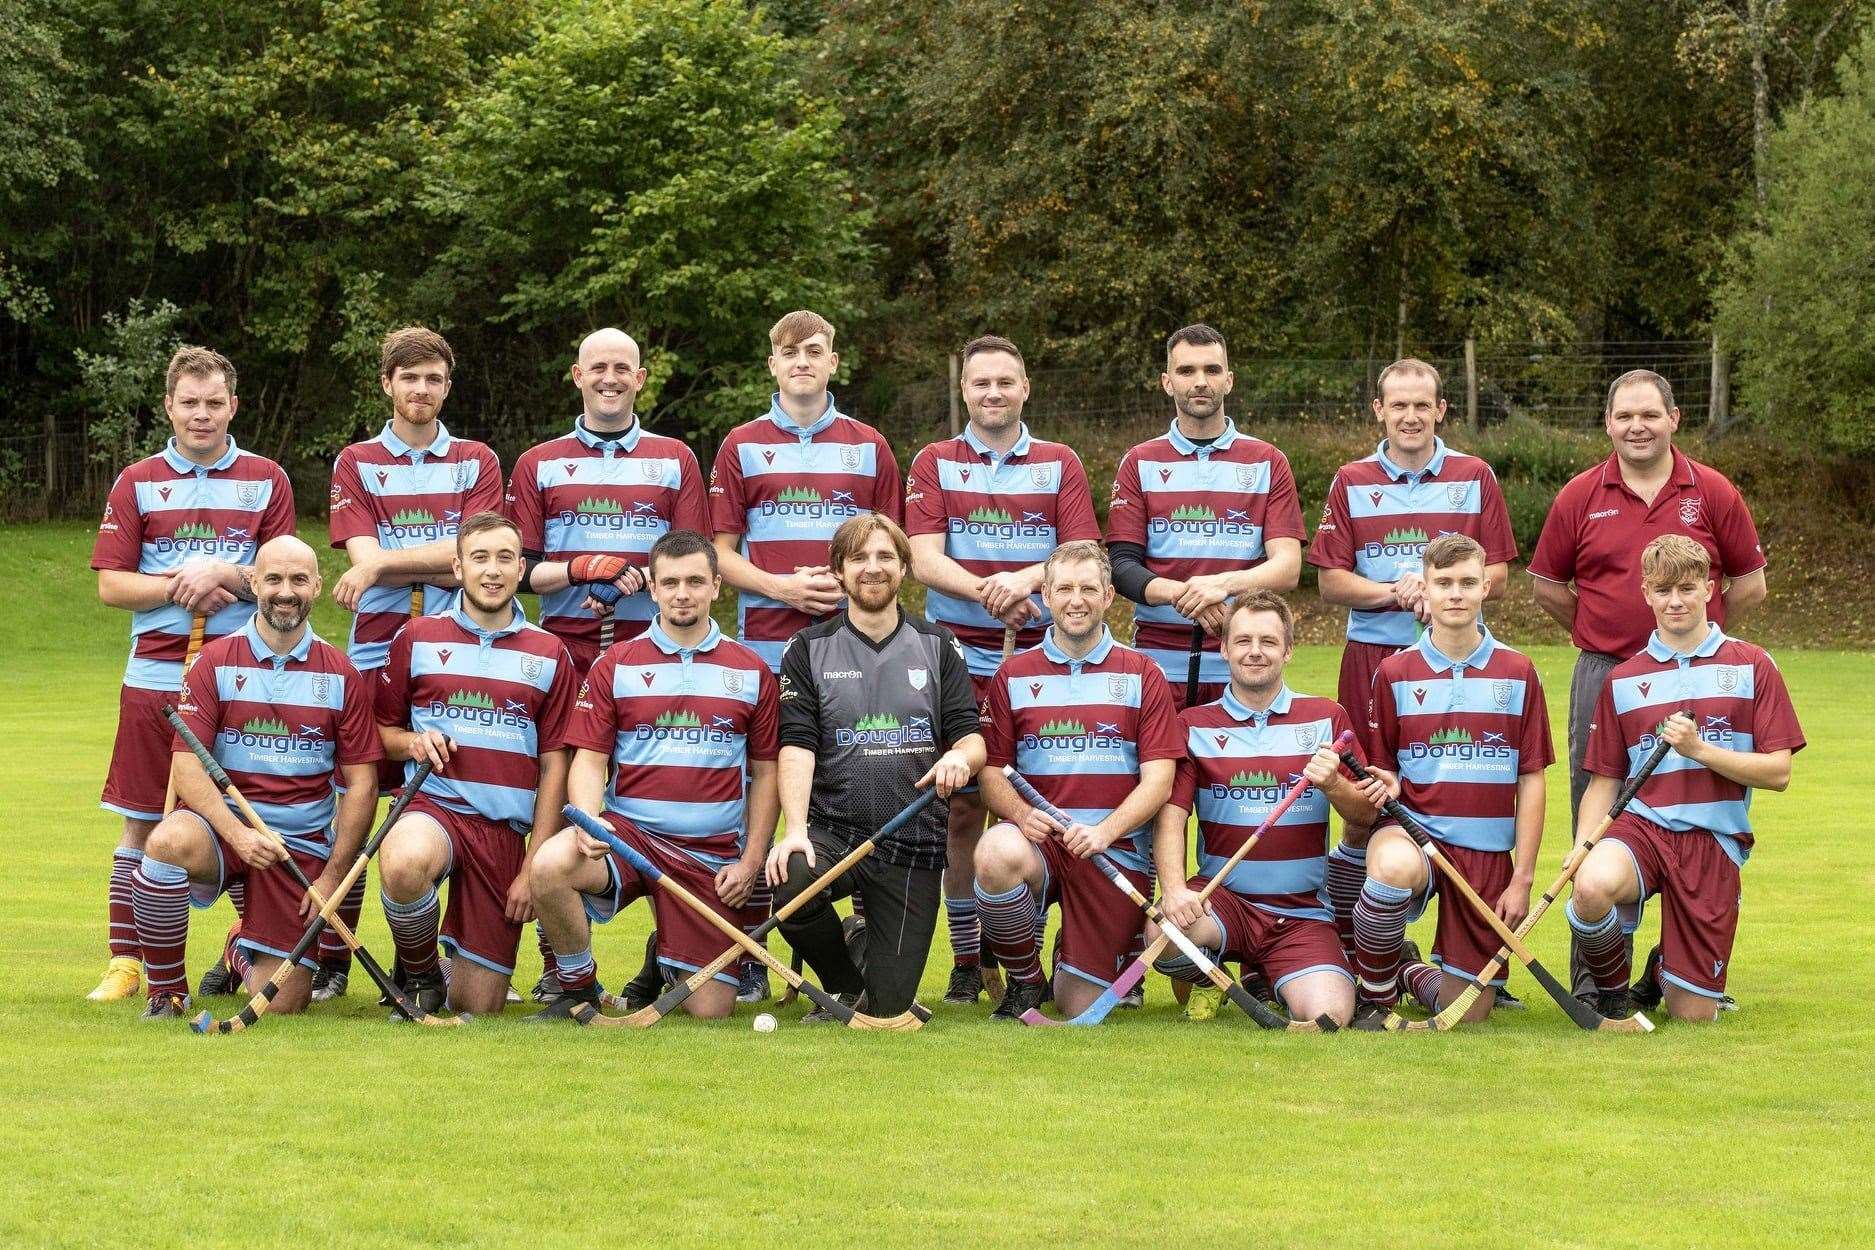 Strathglass Shinty Club has included the Mikeysline logo on their shirt sleeve to raise awareness of the charity.